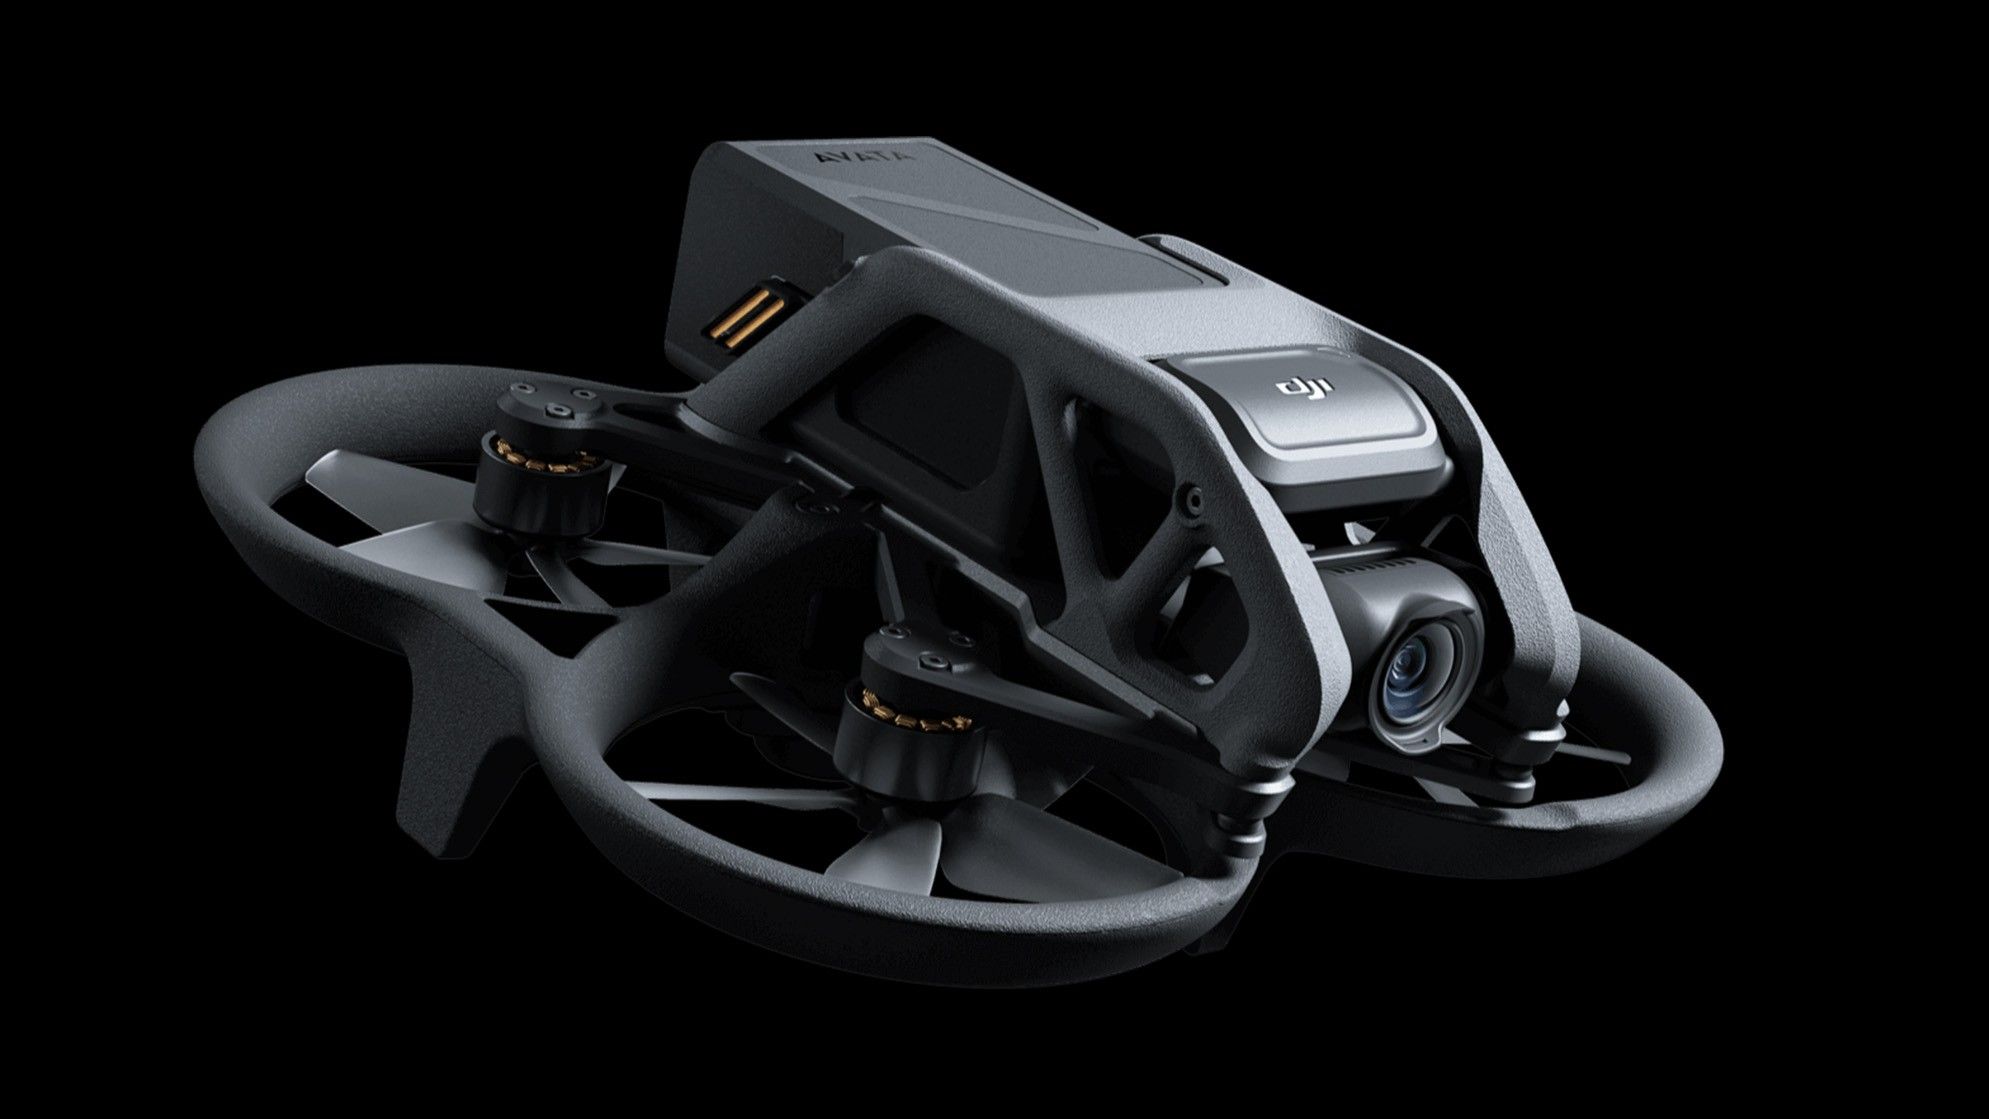 Want a Stunt Performer Operating Your Camera? The DJI Avata FPV Drone Is Just That